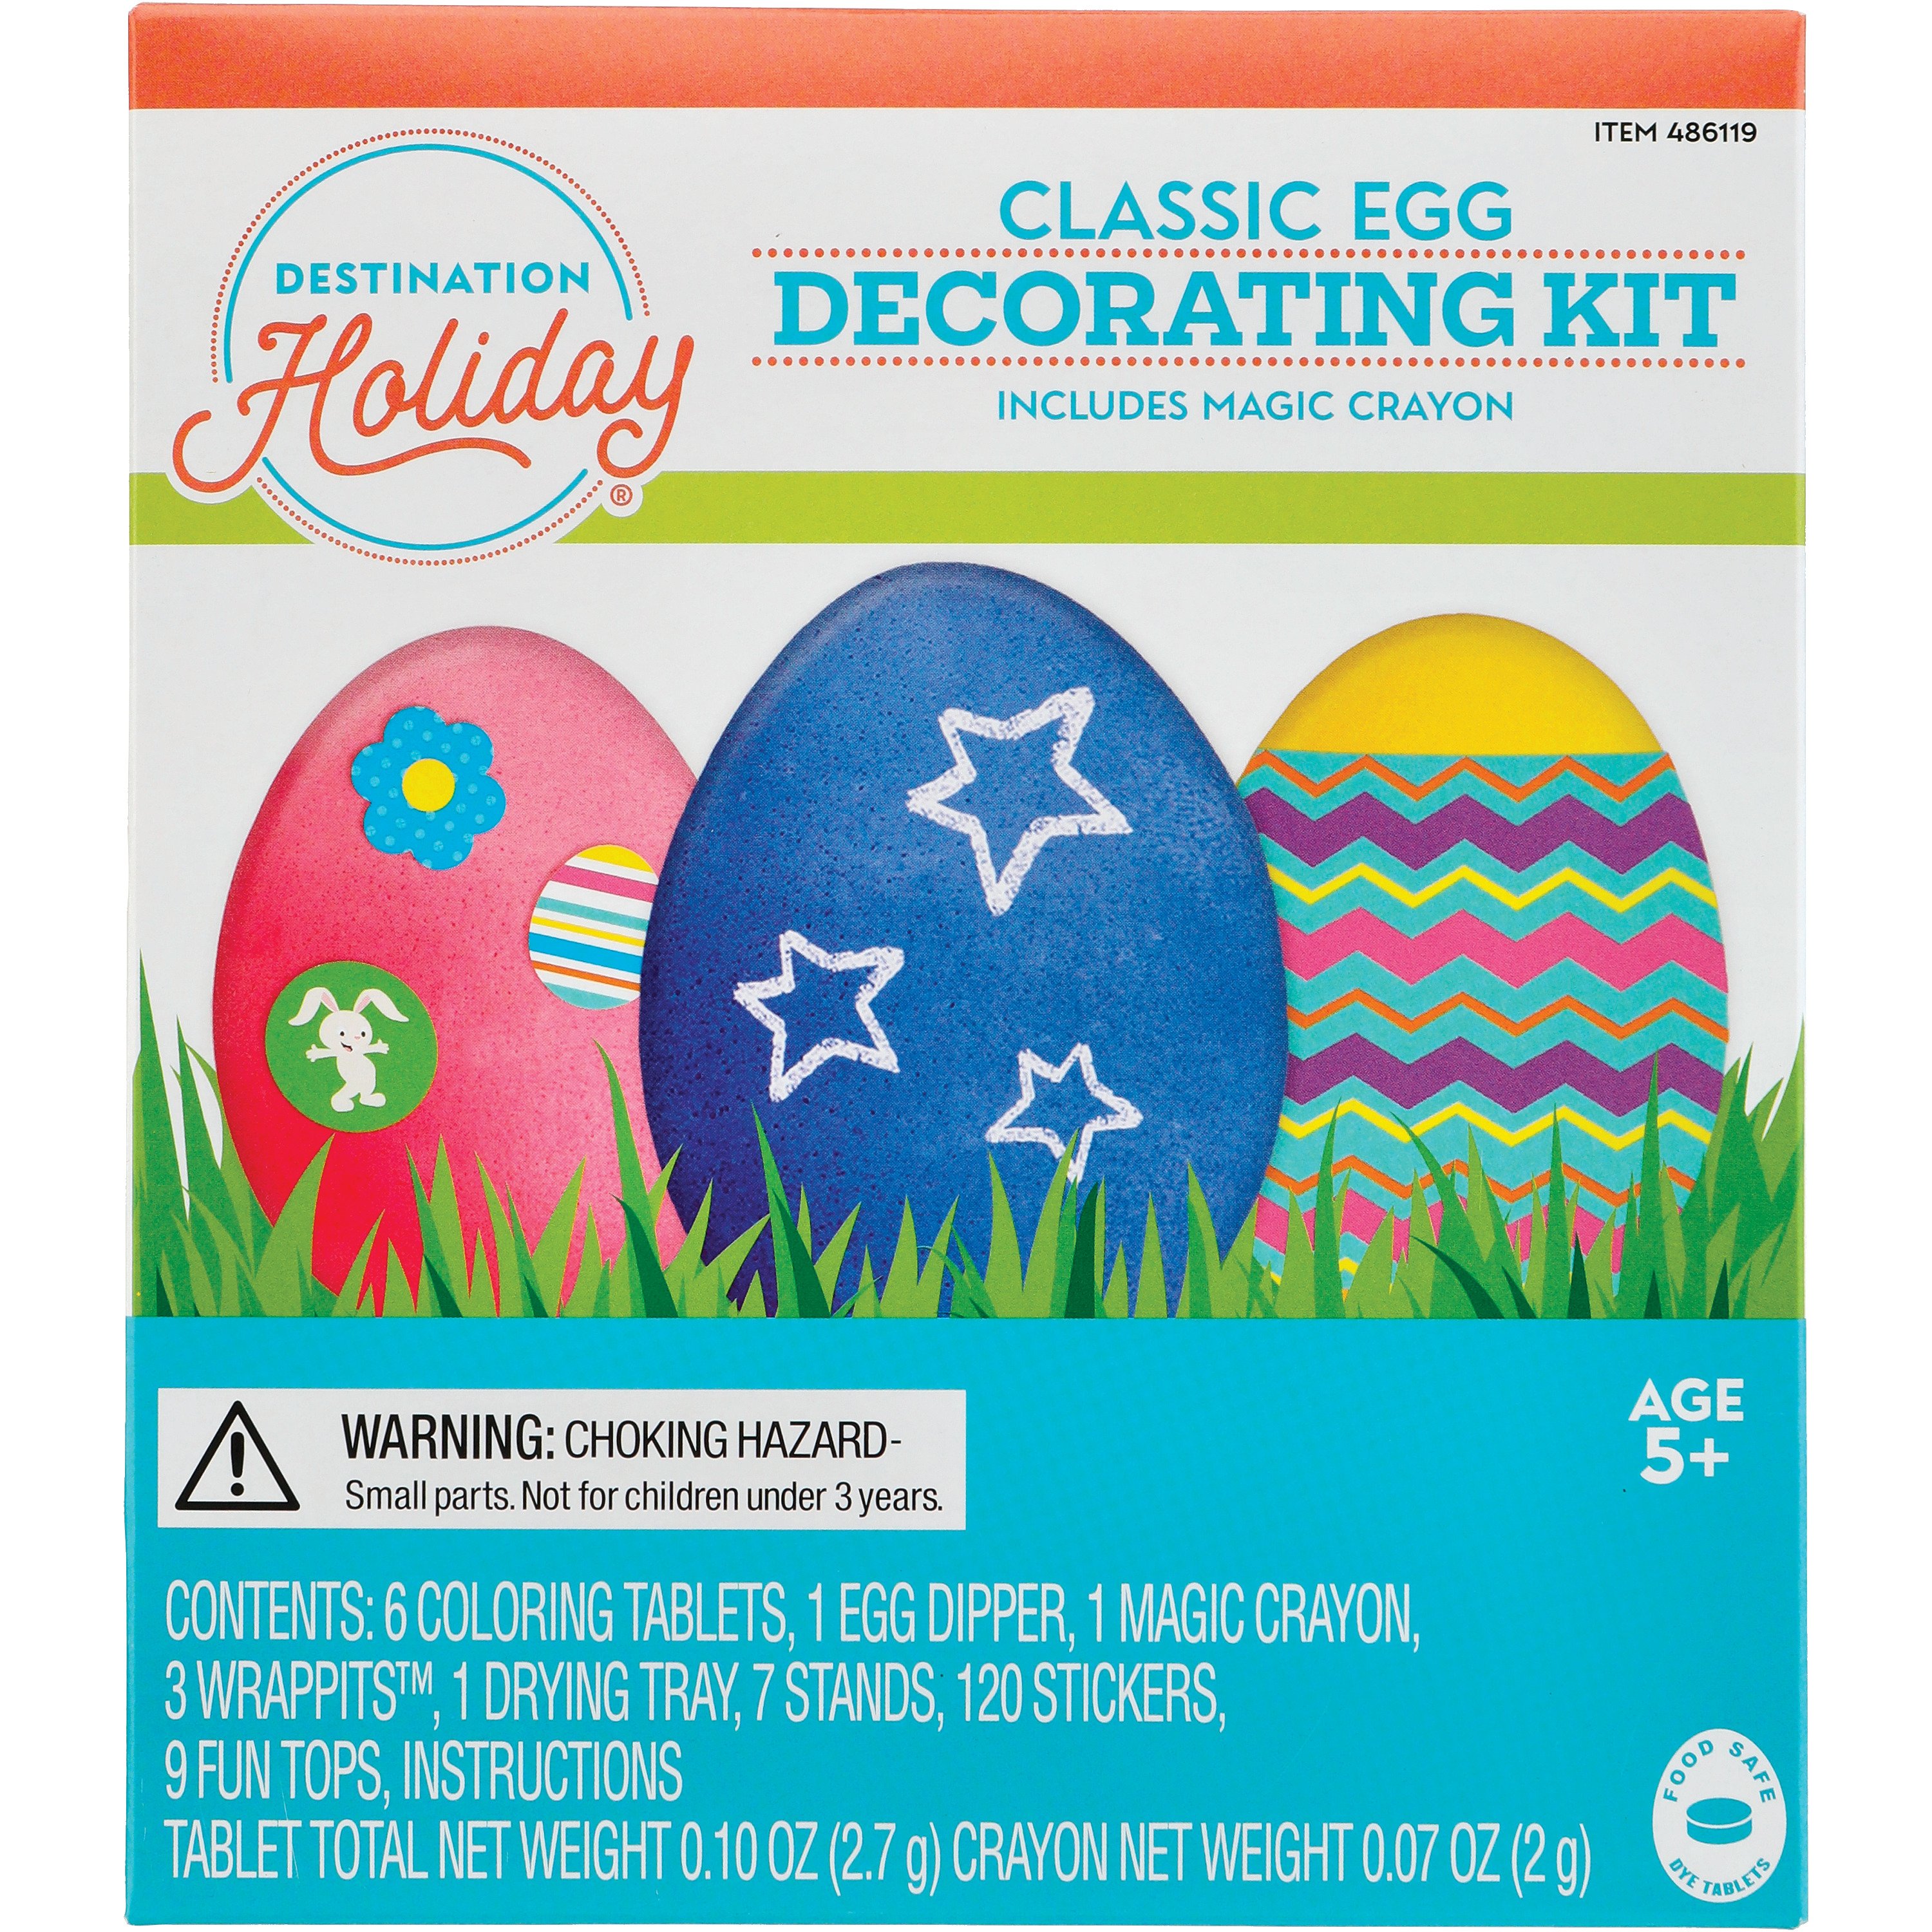 Destination Holiday Classic Easter Egg Decorating Kit Shop Kits at HEB